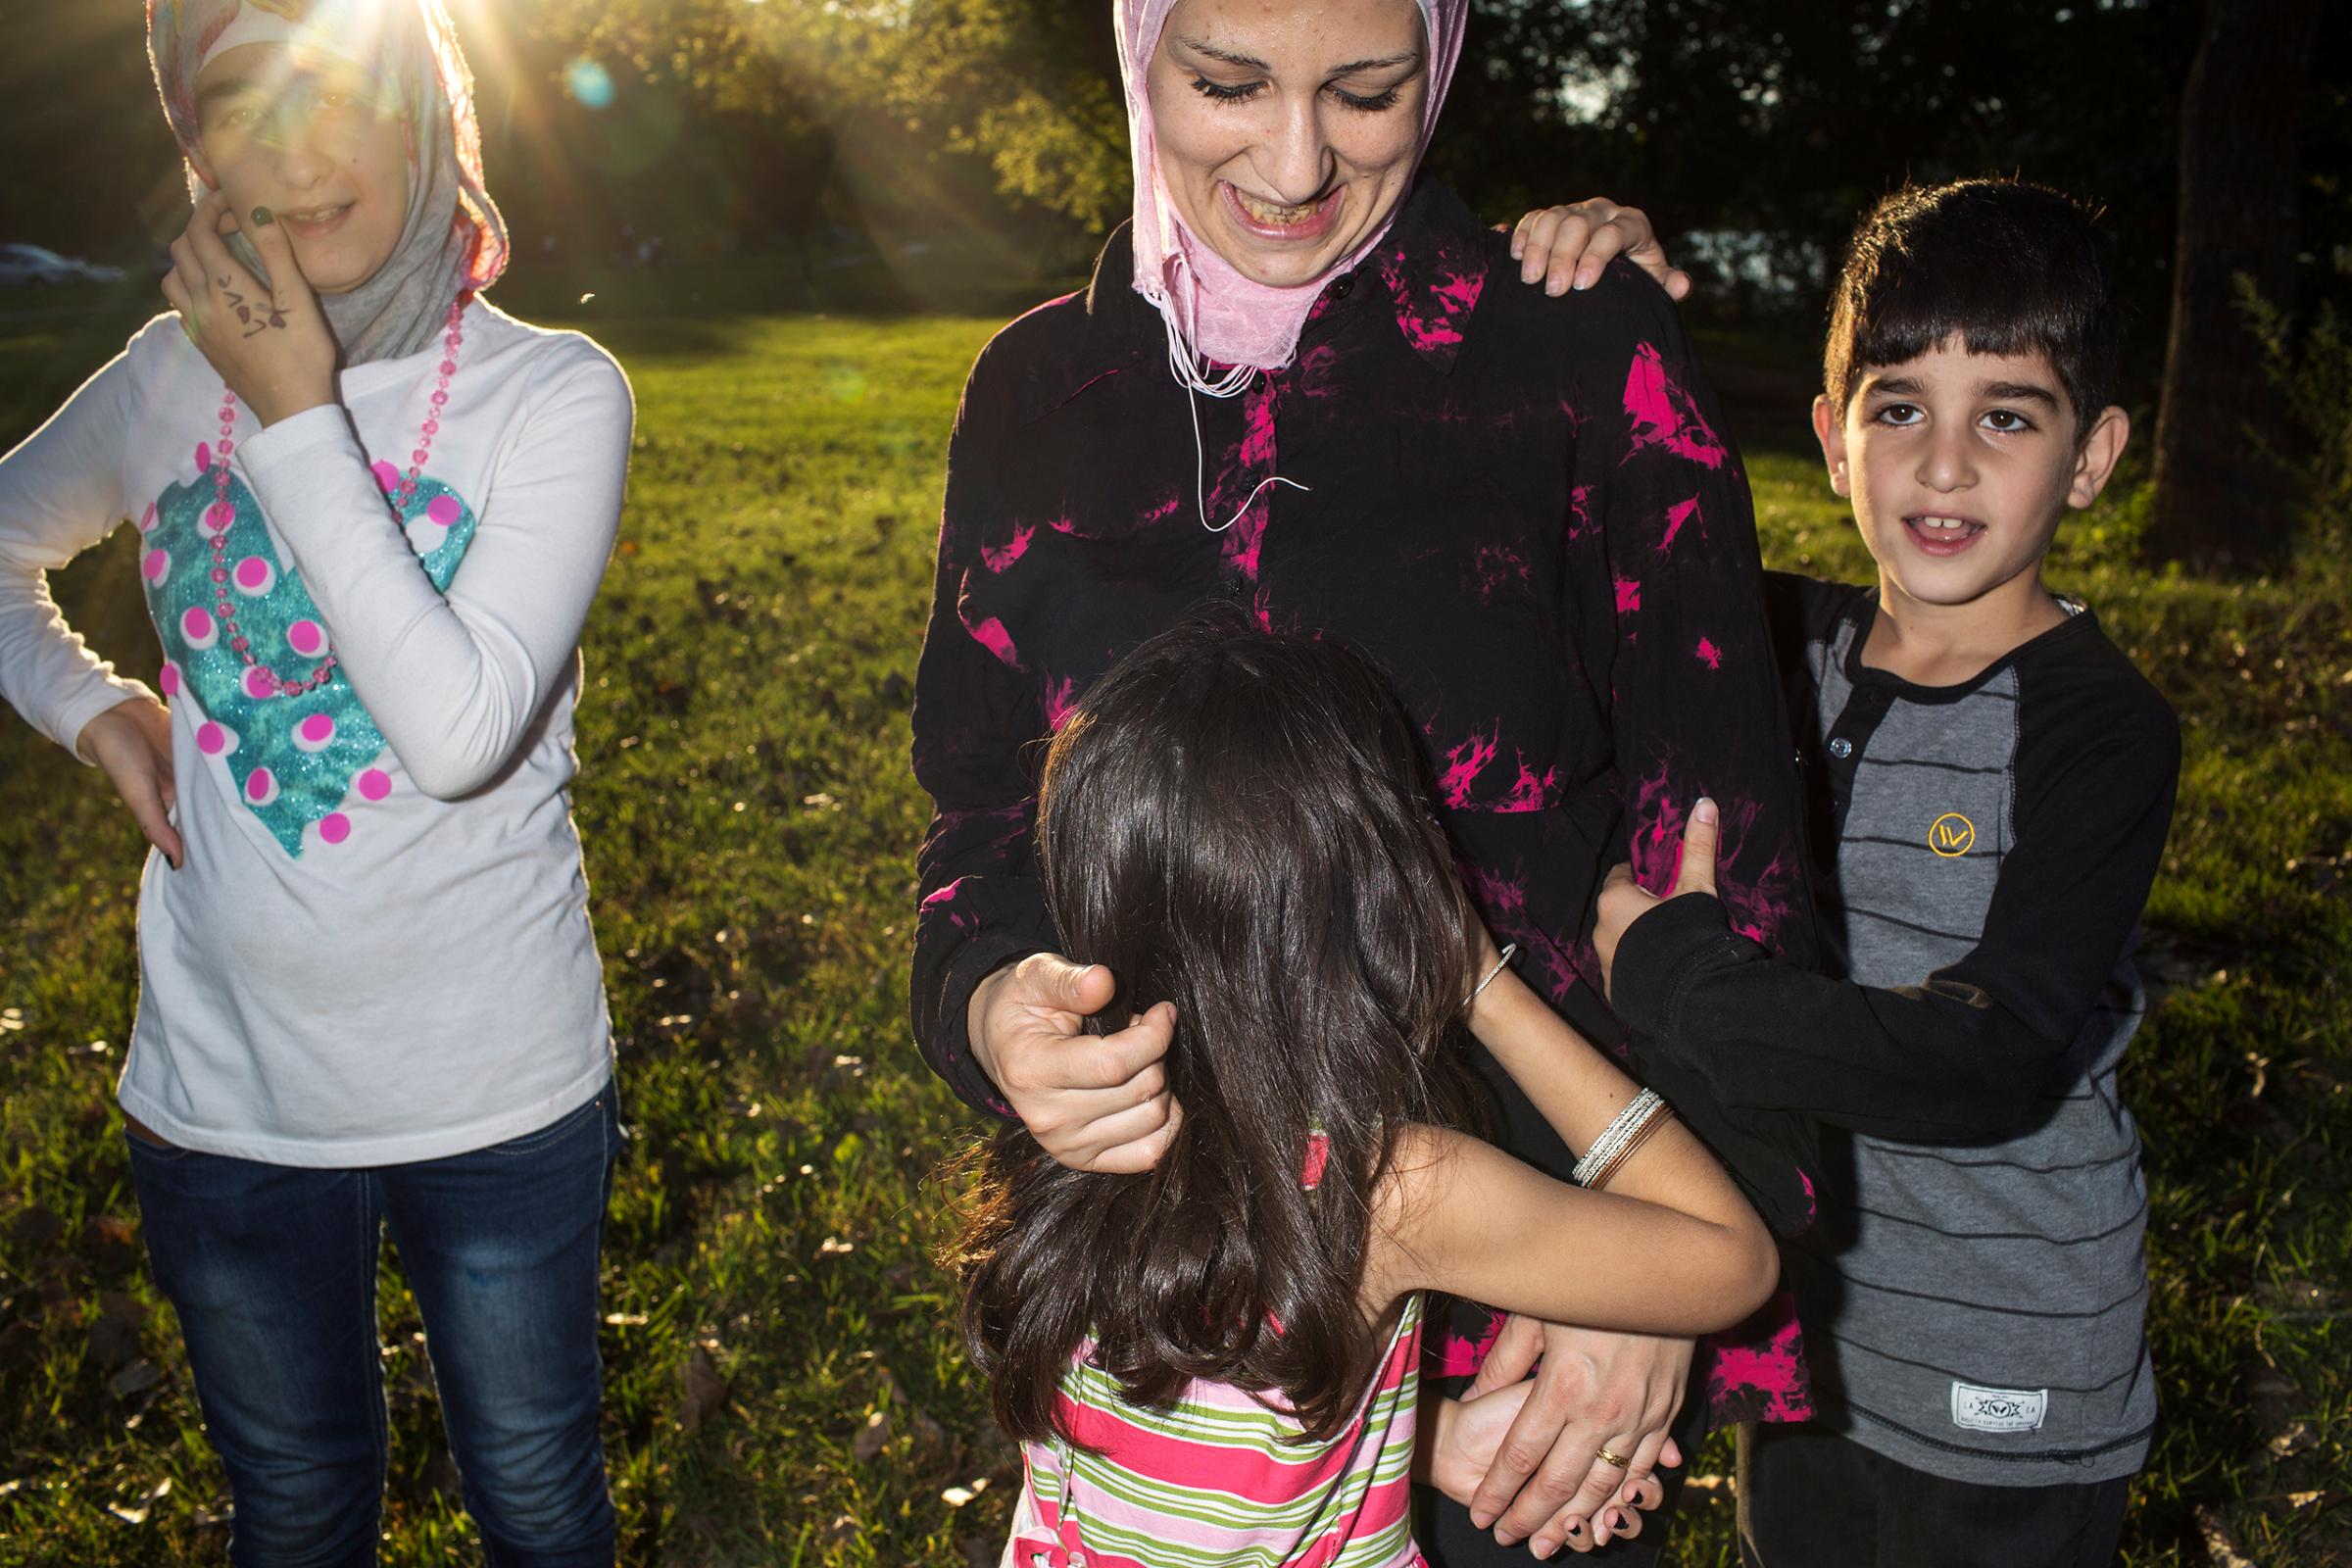 Ghazweh plays with her children Sedra, Hala and Mutaz at a park in Des Moines, Iowa.